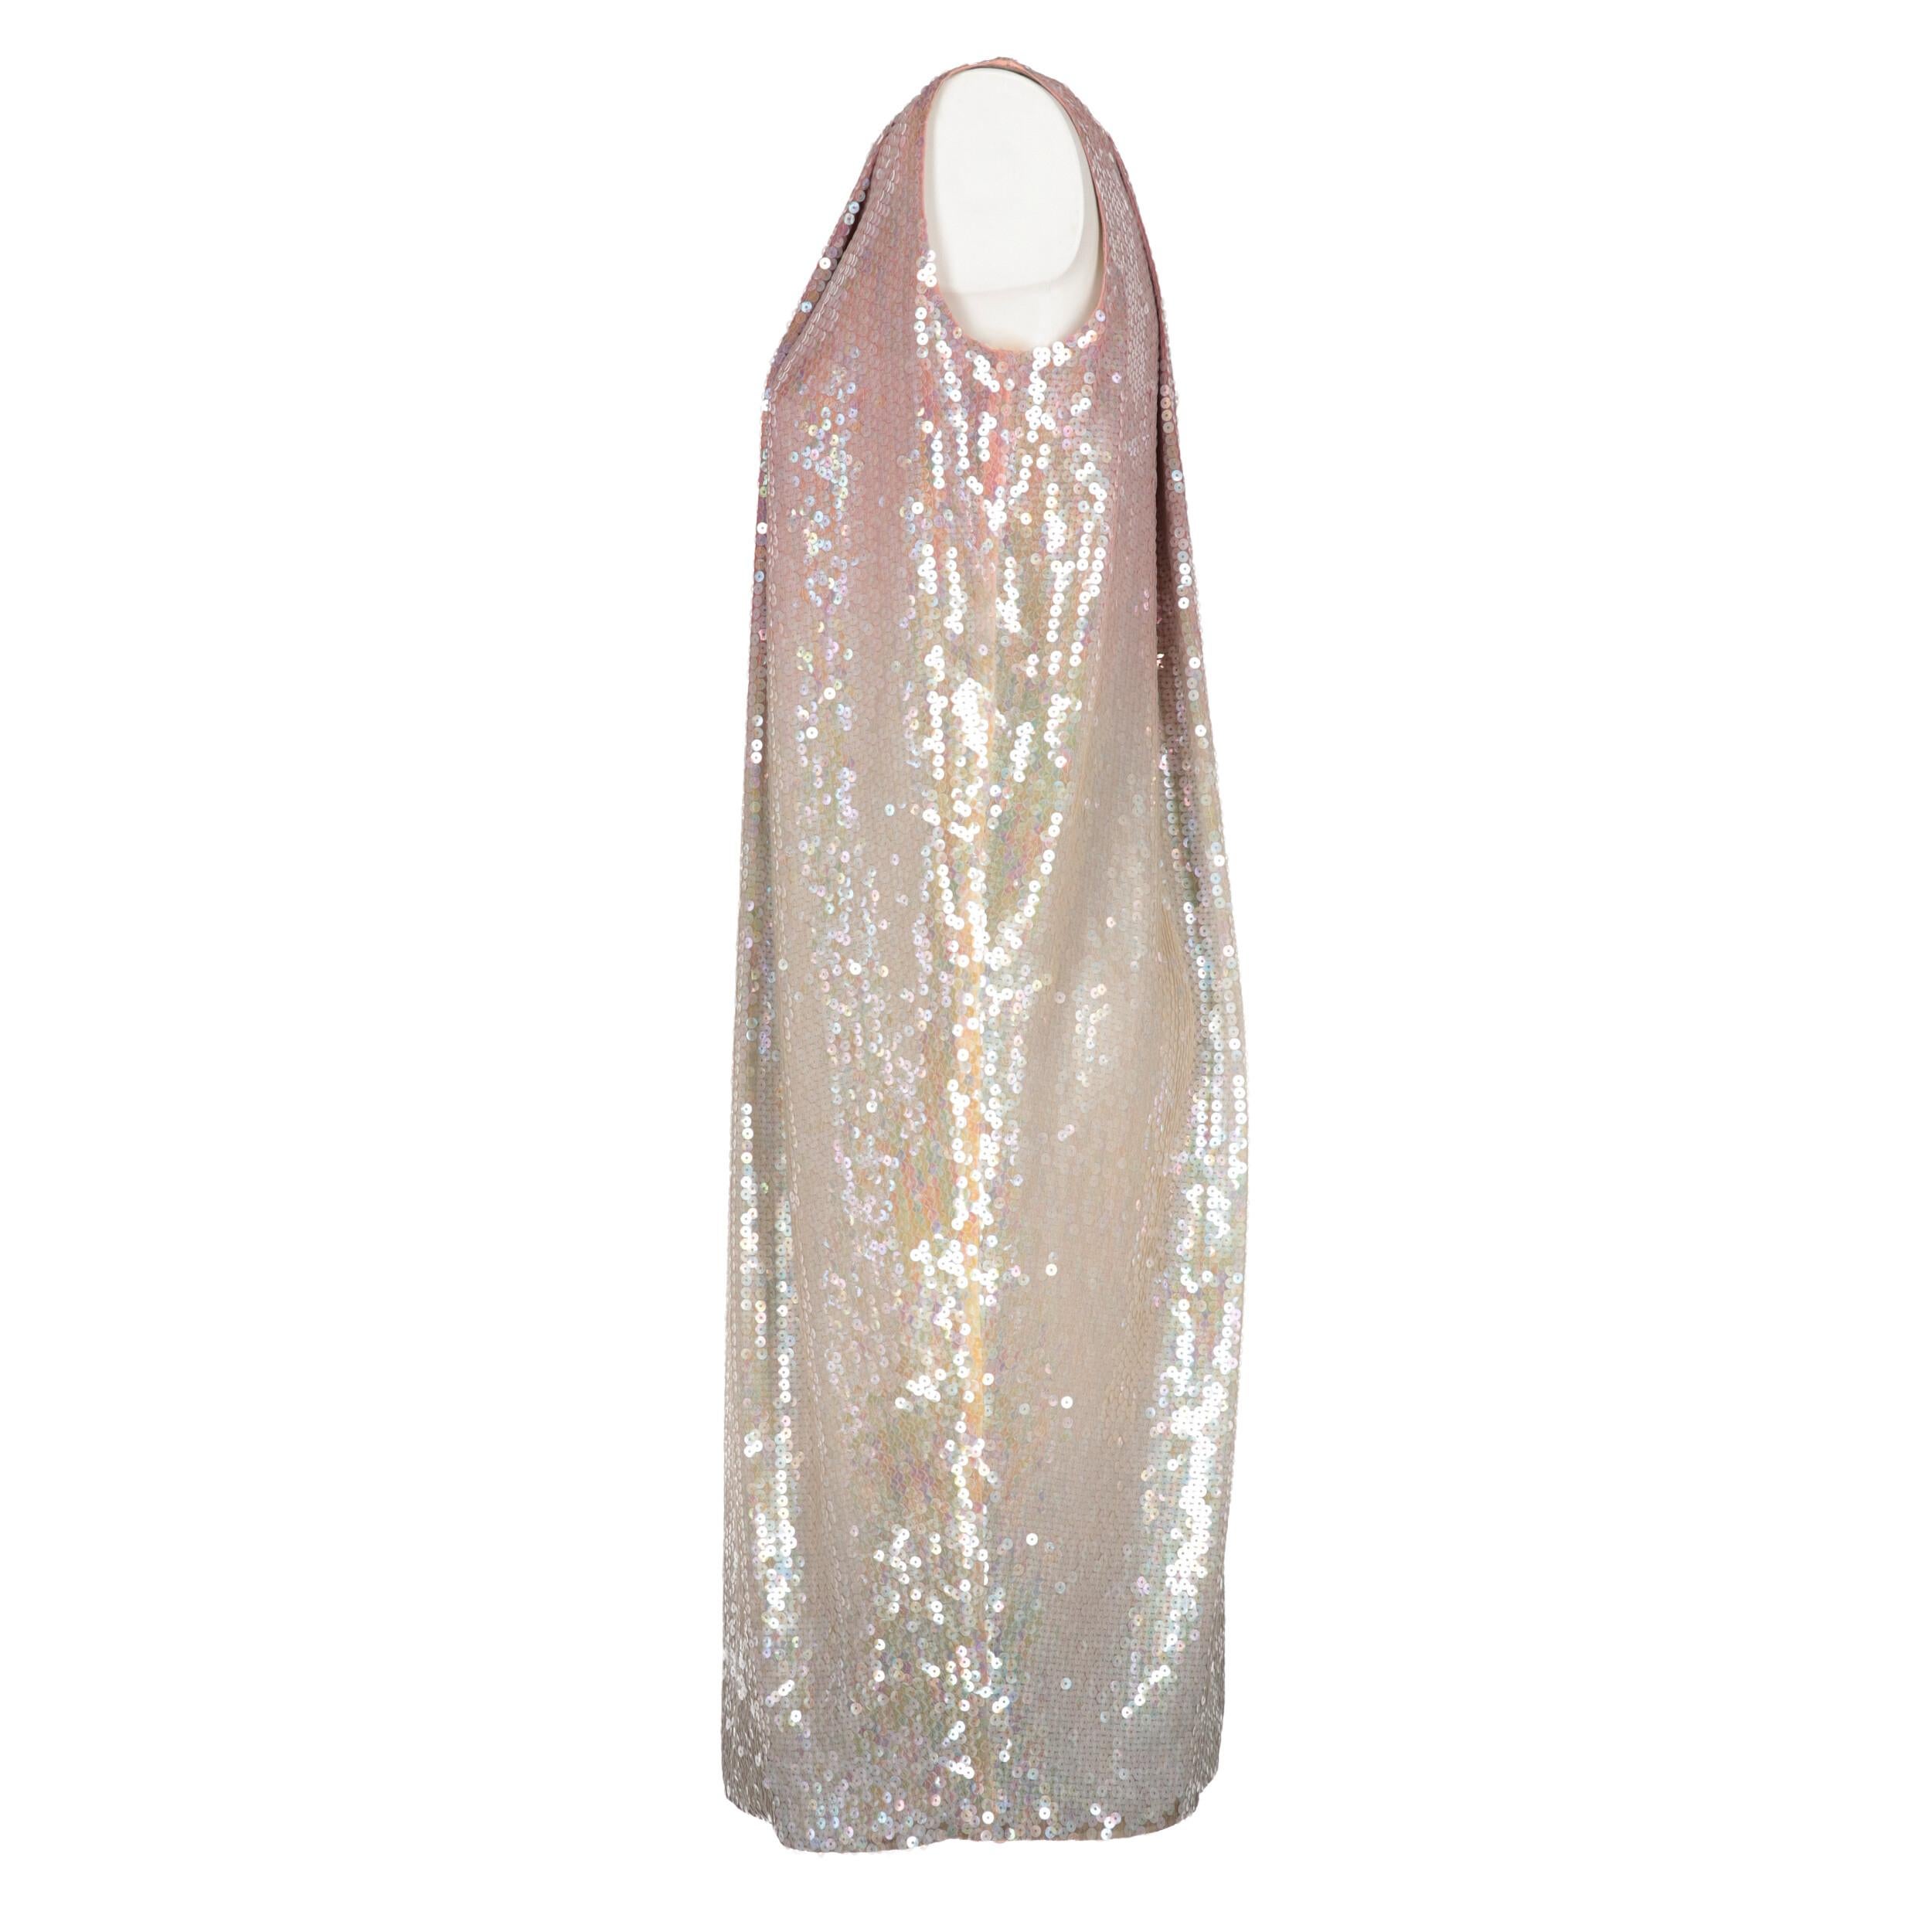 Jil Sander silk sleeveless dress in shades of pink, ivory and light grey, fully sequined. Round neck model, with wide front pleat.
Item shows light signs of wear on threads and sequins, as shown in the pictures.

Year: 2017
Size: 34 EU

Flat